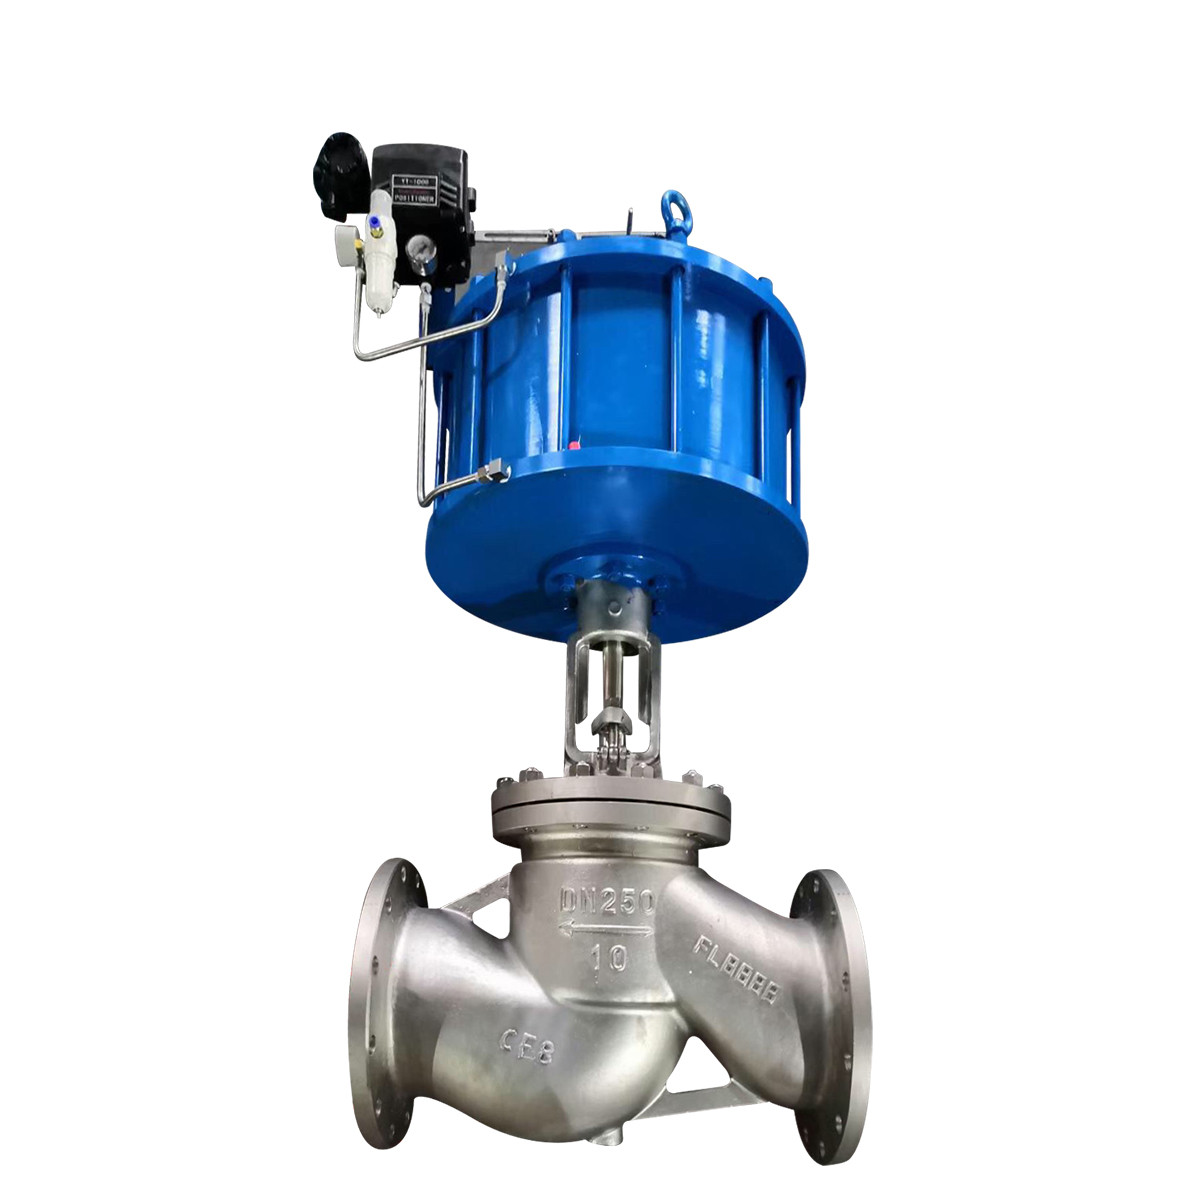 Globe control valve with pneumatic cylinder